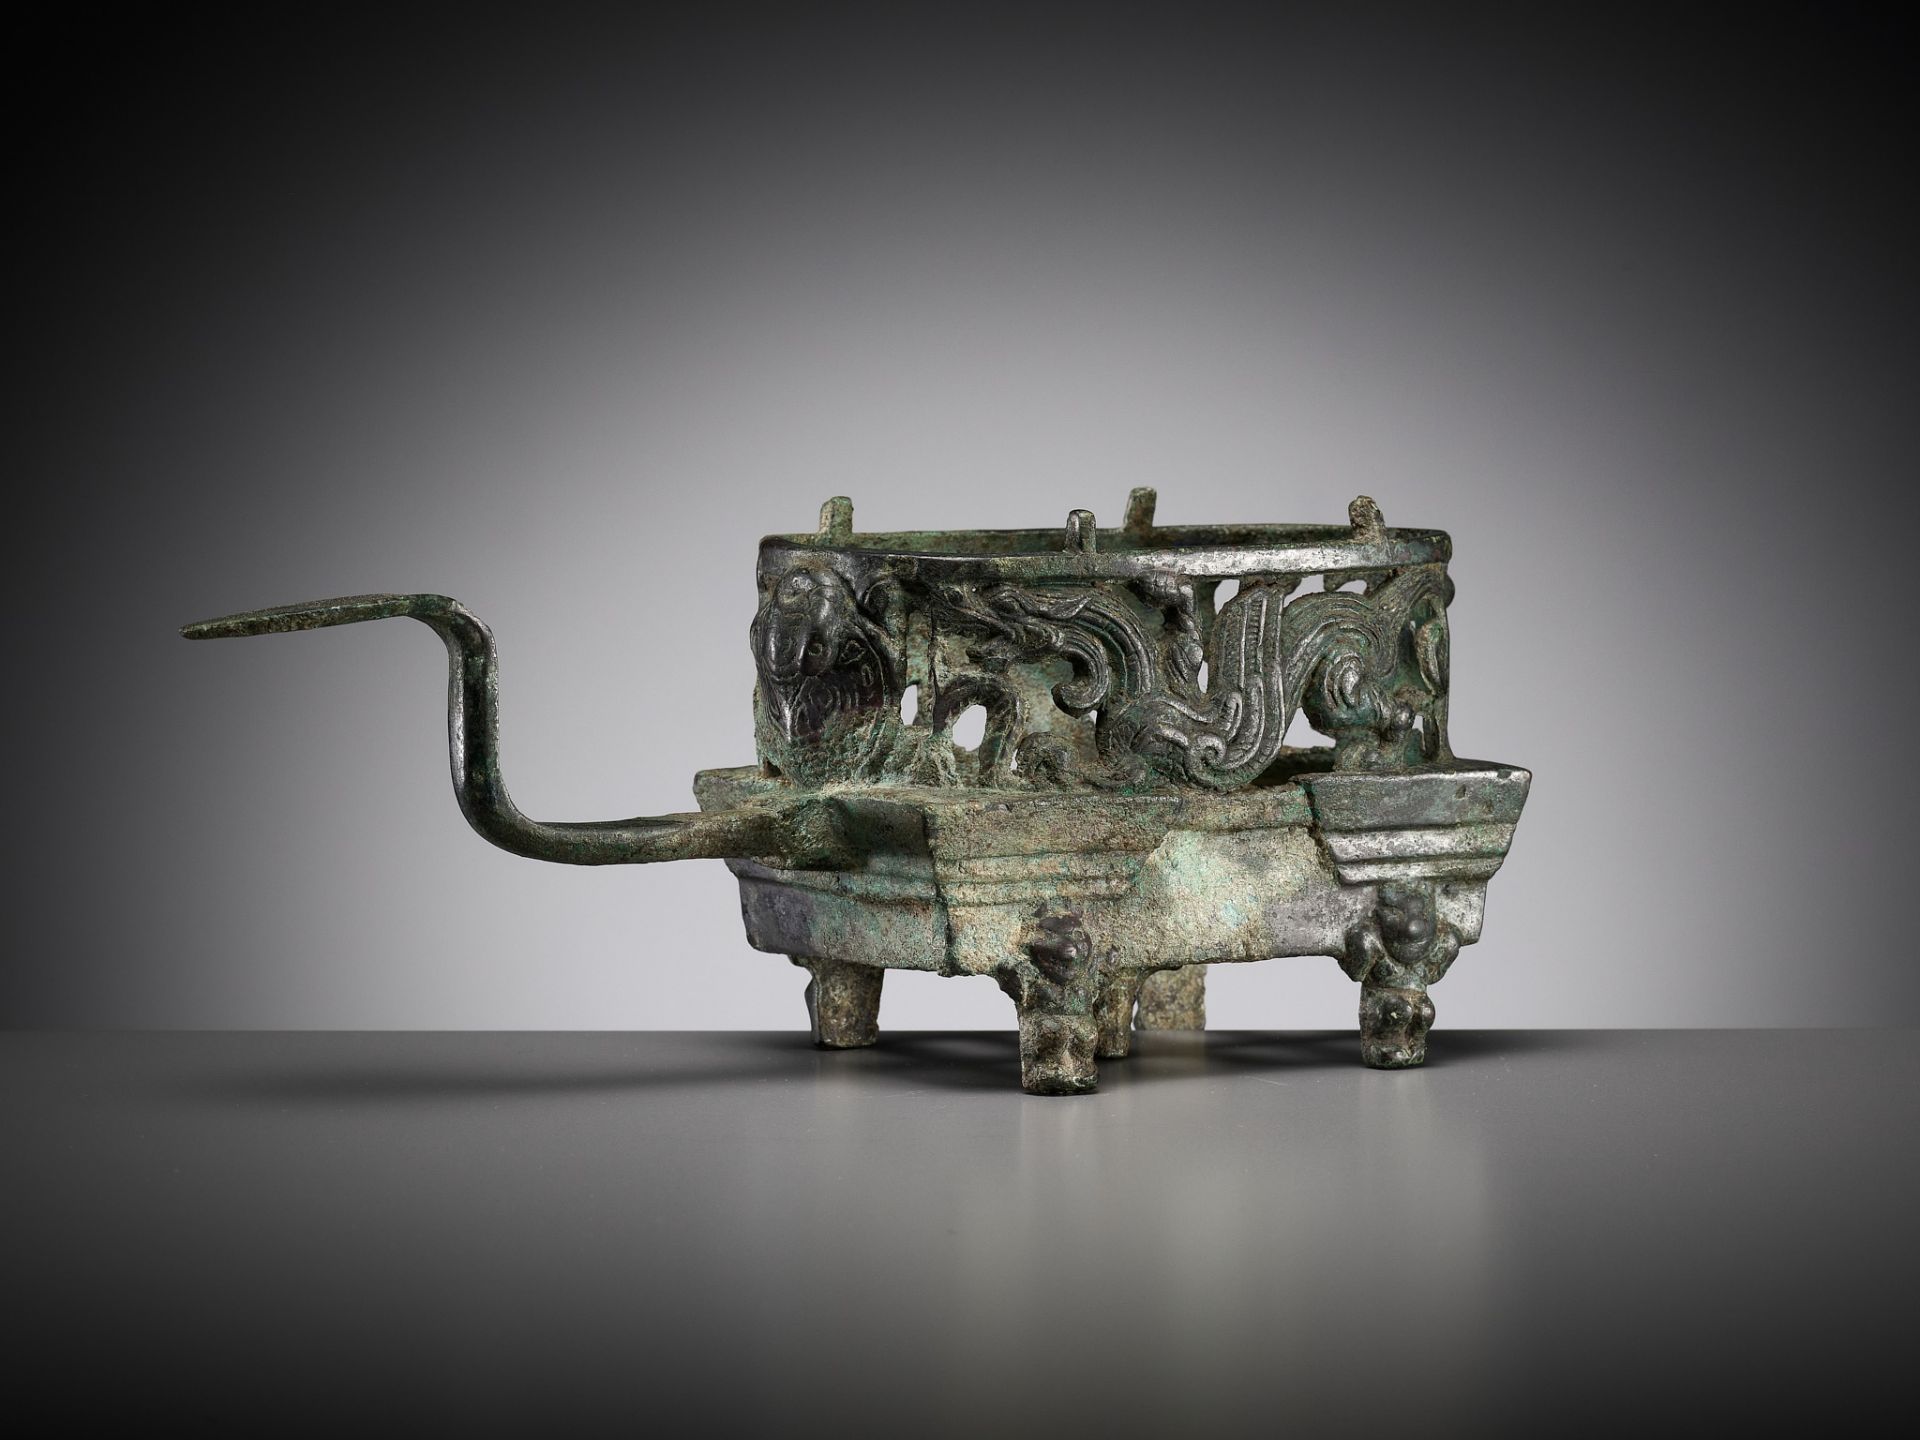 A 'FOUR AUSPICIOUS BEASTS' (SI XIANG) BRONZE BRAZIER, HAN DYNASTY, CHINA, 206 BC-220 AD - Image 2 of 16